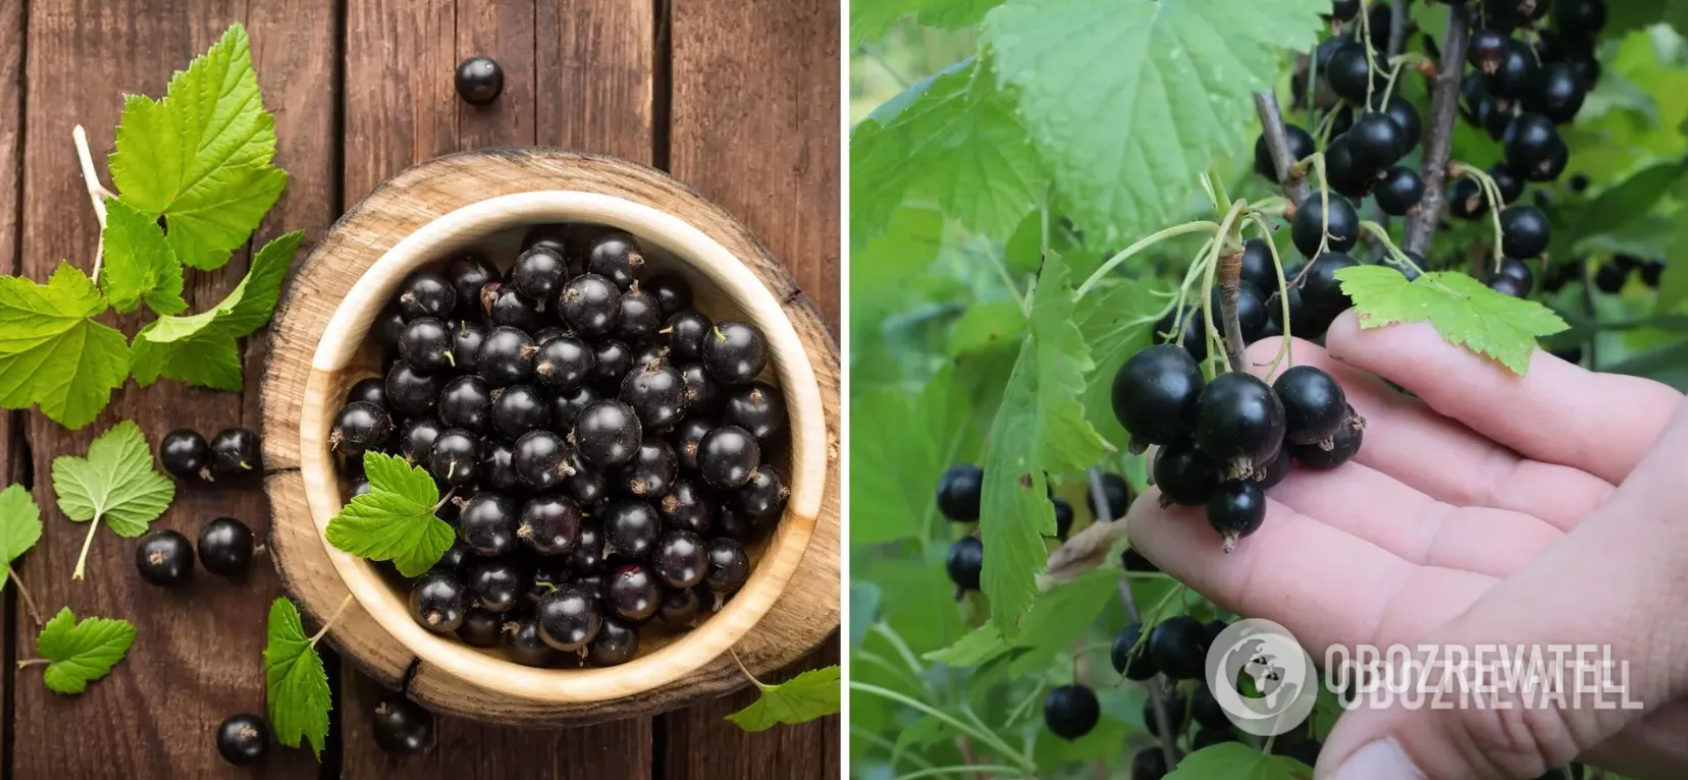 How to make jam-jelly from black currants: you need only 3 ingredients